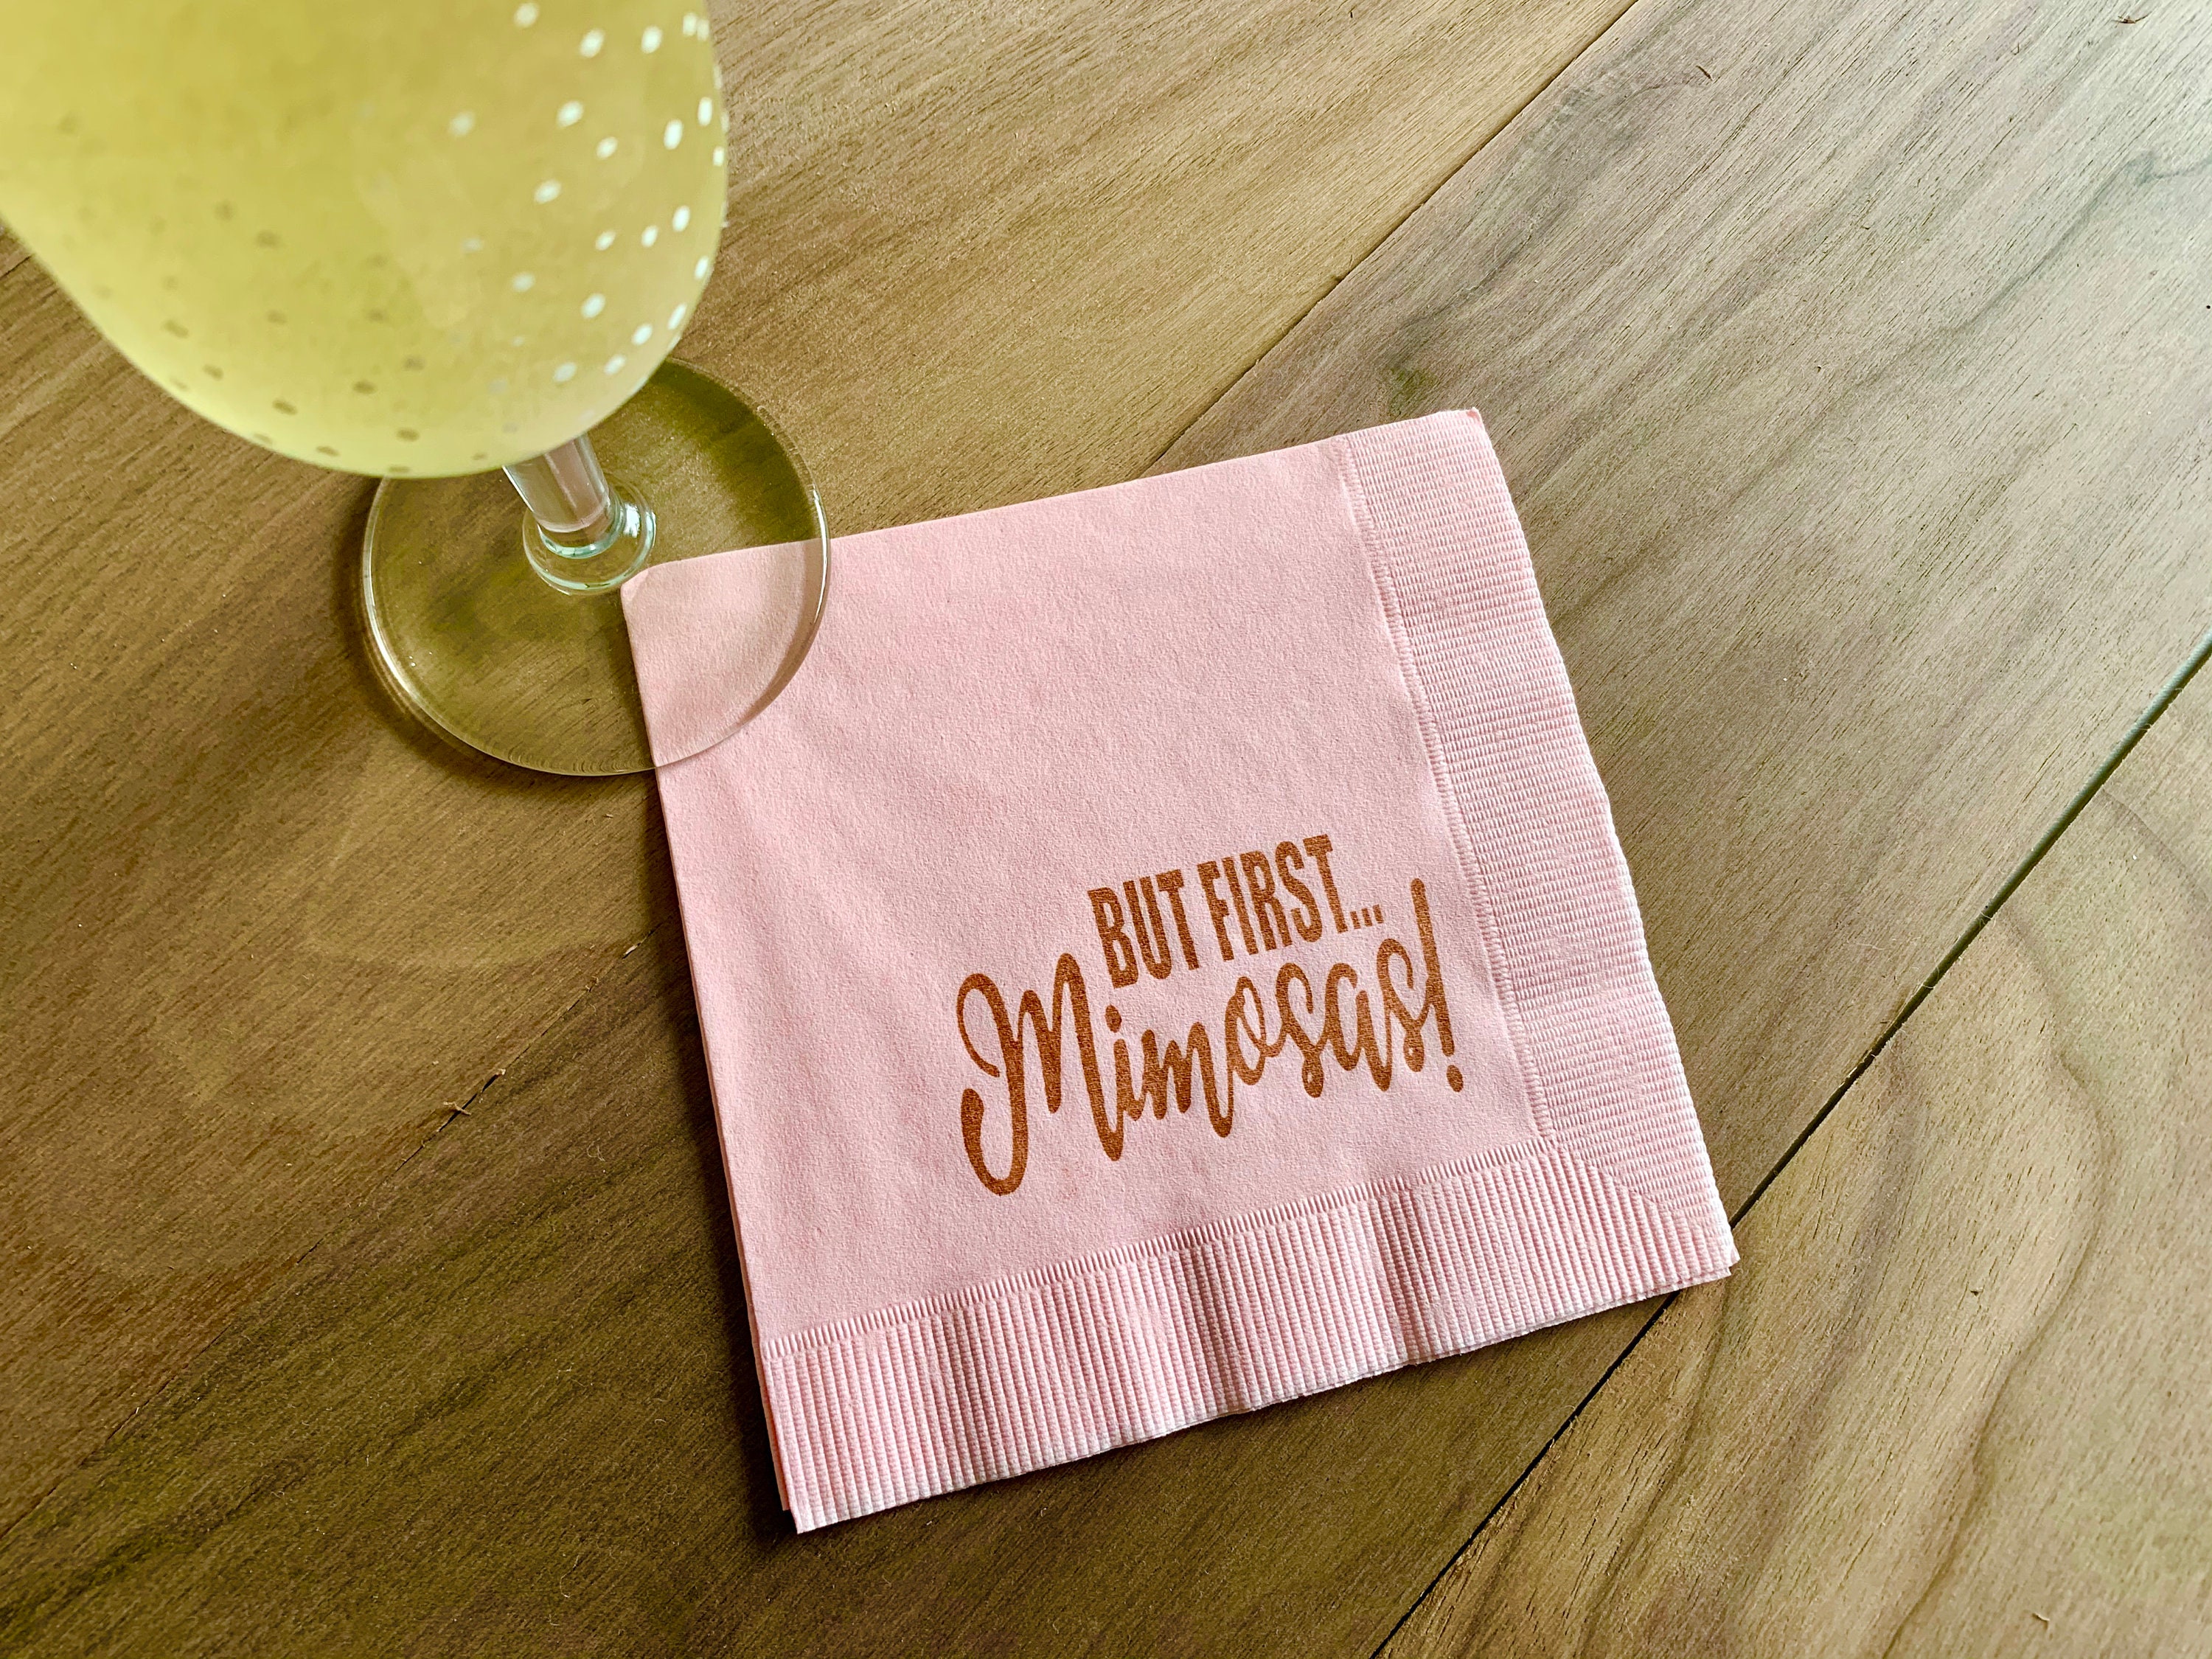 Need a last minute gift? Stop by & enjoy a mimosa while you shop